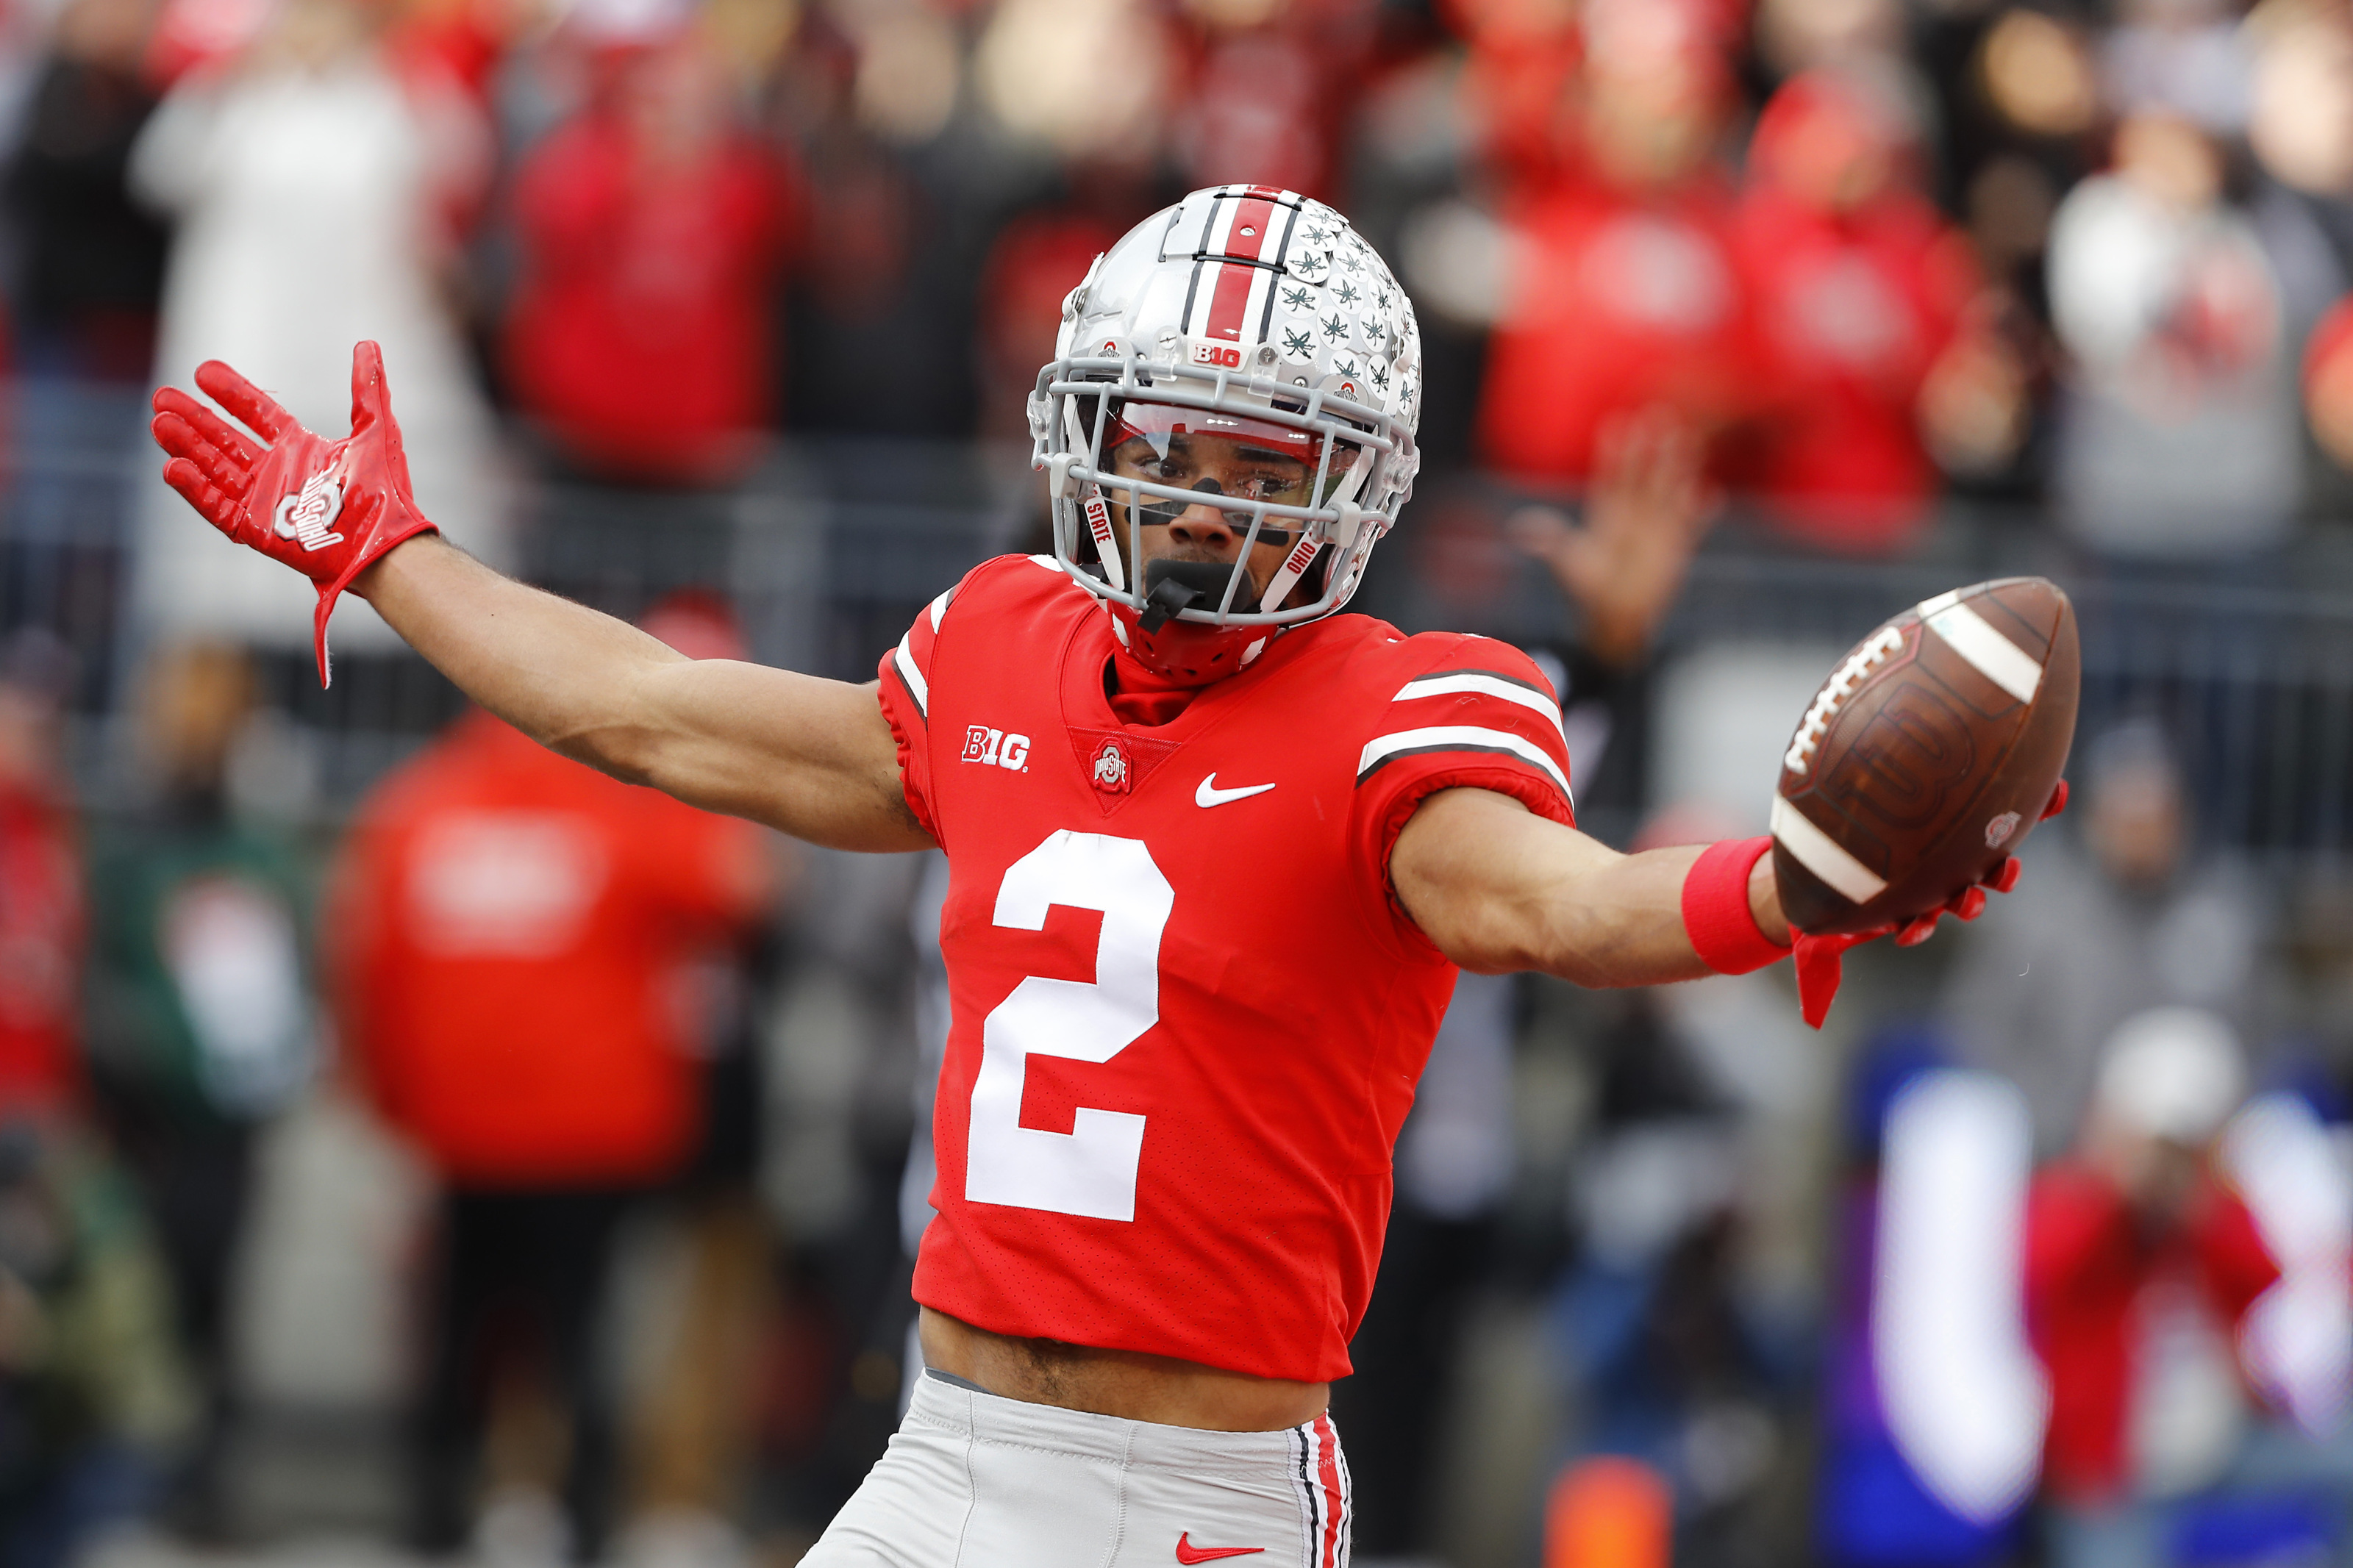 2022 NFL Draft Prospects to Watch: Ohio State vs. Michigan - Page 4